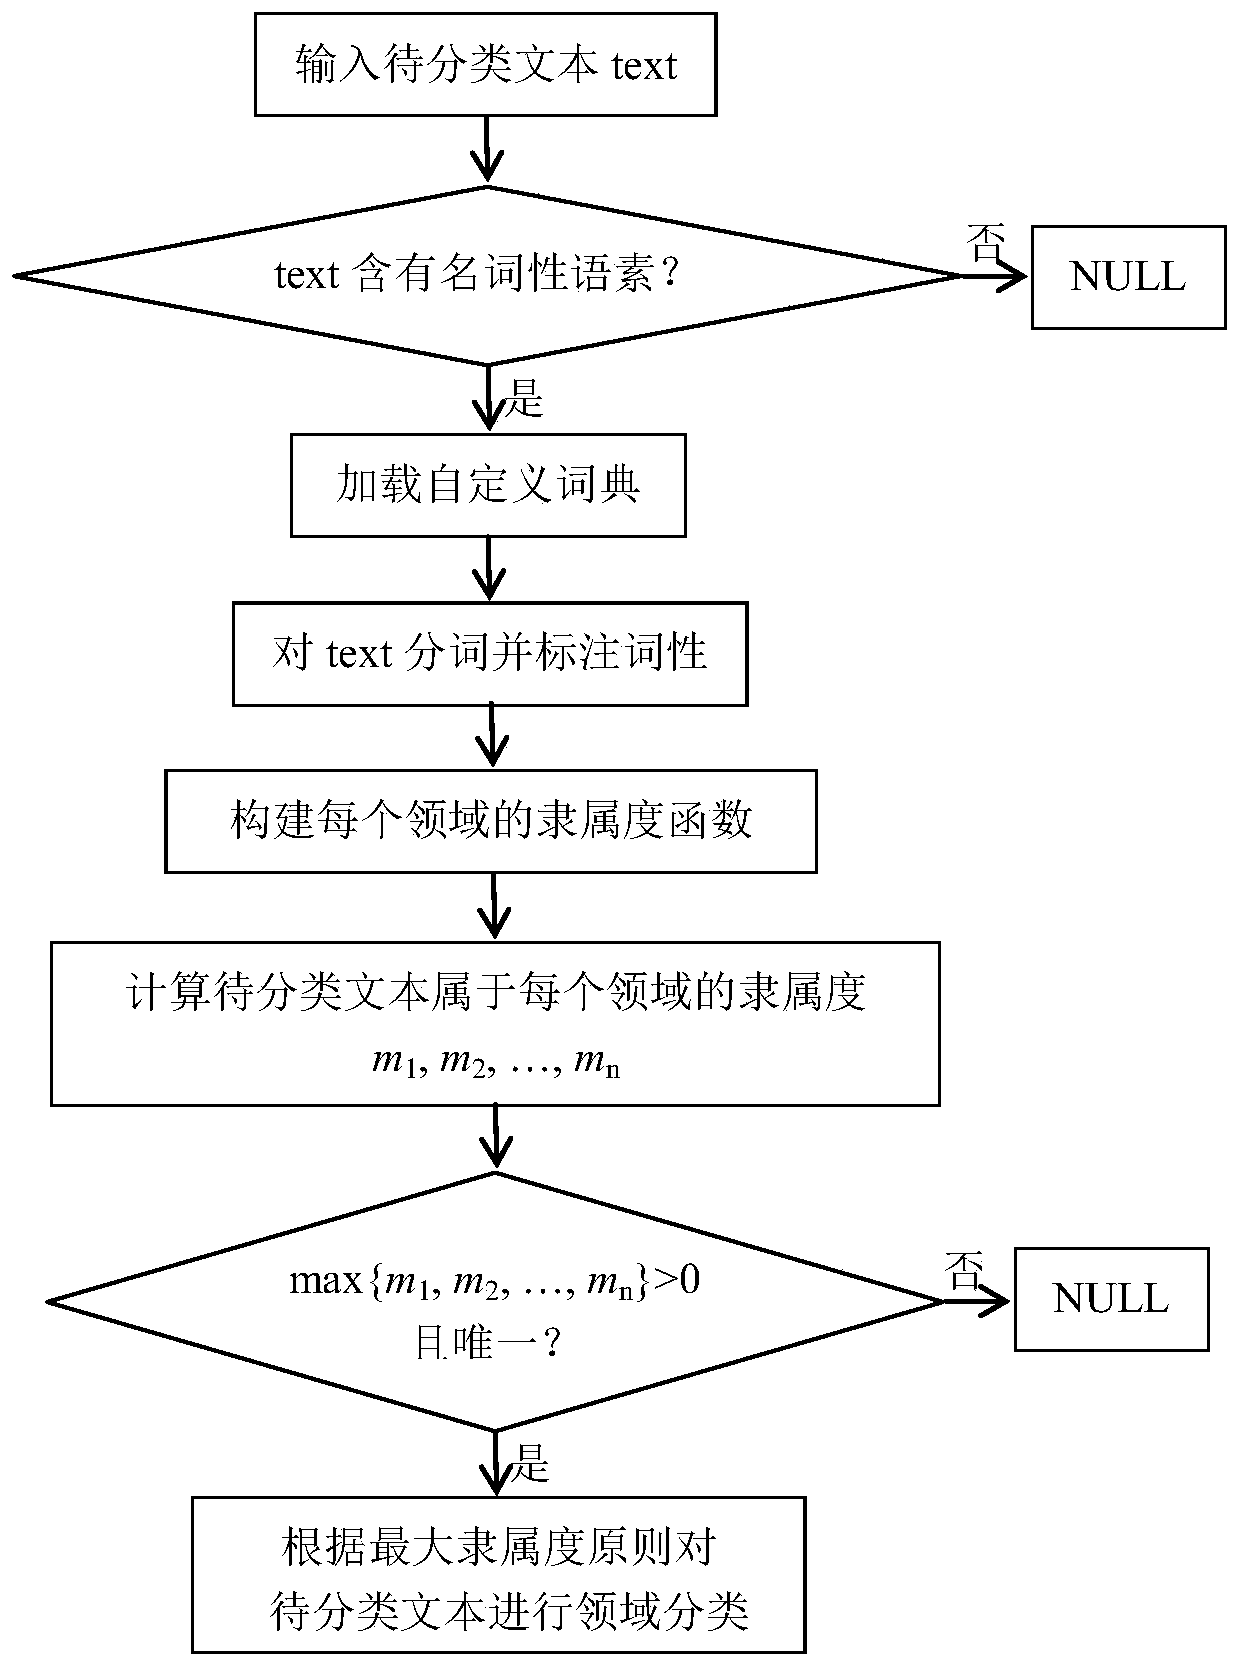 Short text classification method based on part-of-speech and fuzzy pattern recognition combination